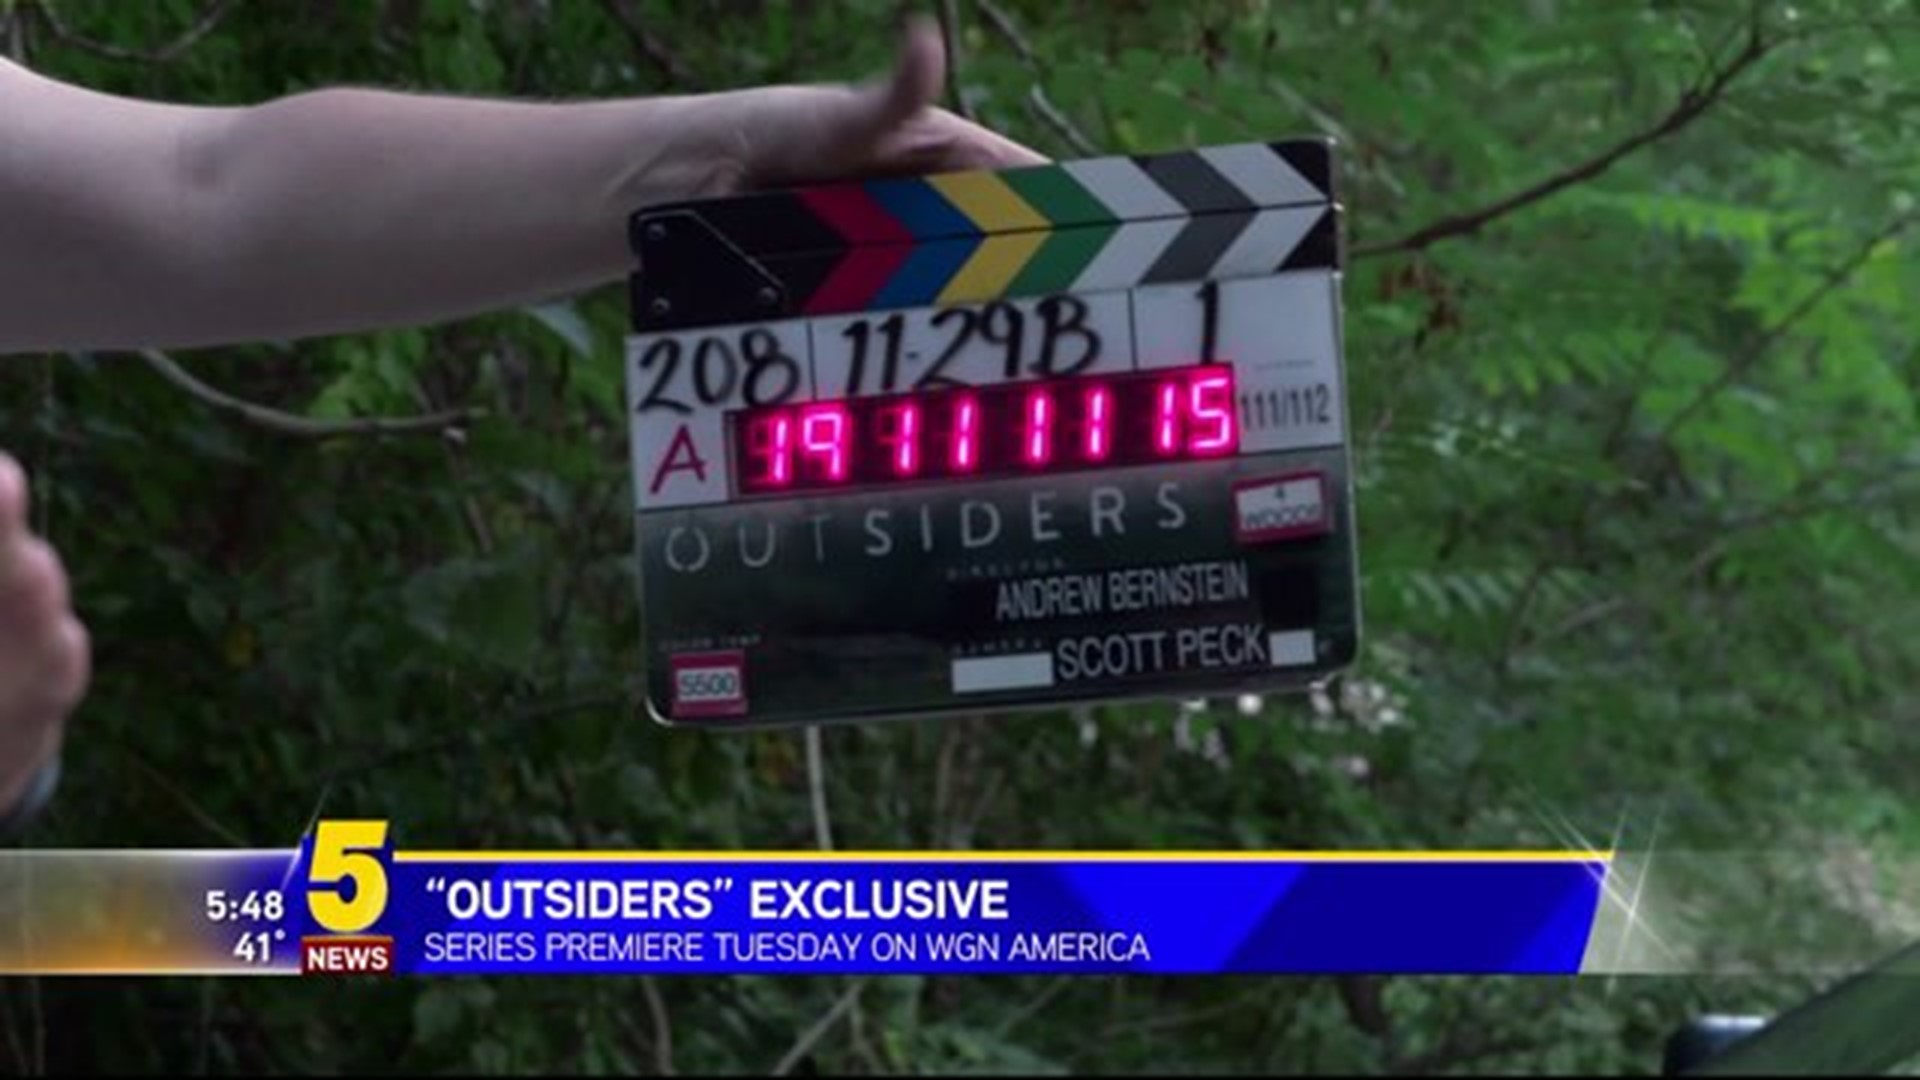 "OUTSIDERS" EXCLUSIVE